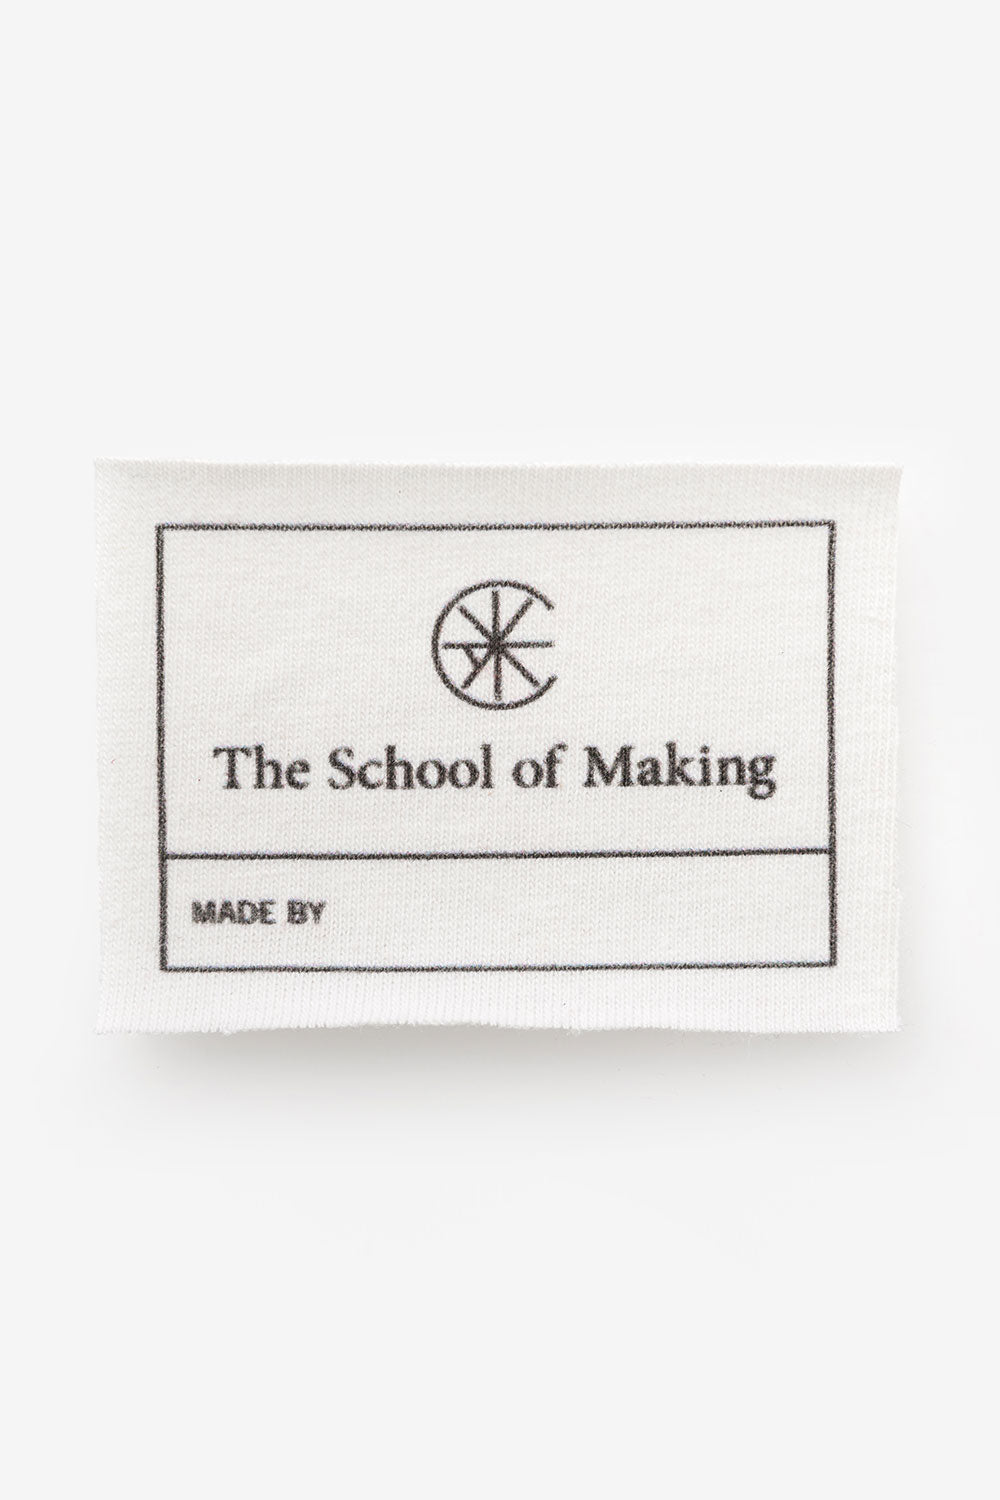 The School of Making The A-Line Dress Bundle 100% Organic Cotton Fabric Clothing Label for Sewing Supplies and DIY Projects